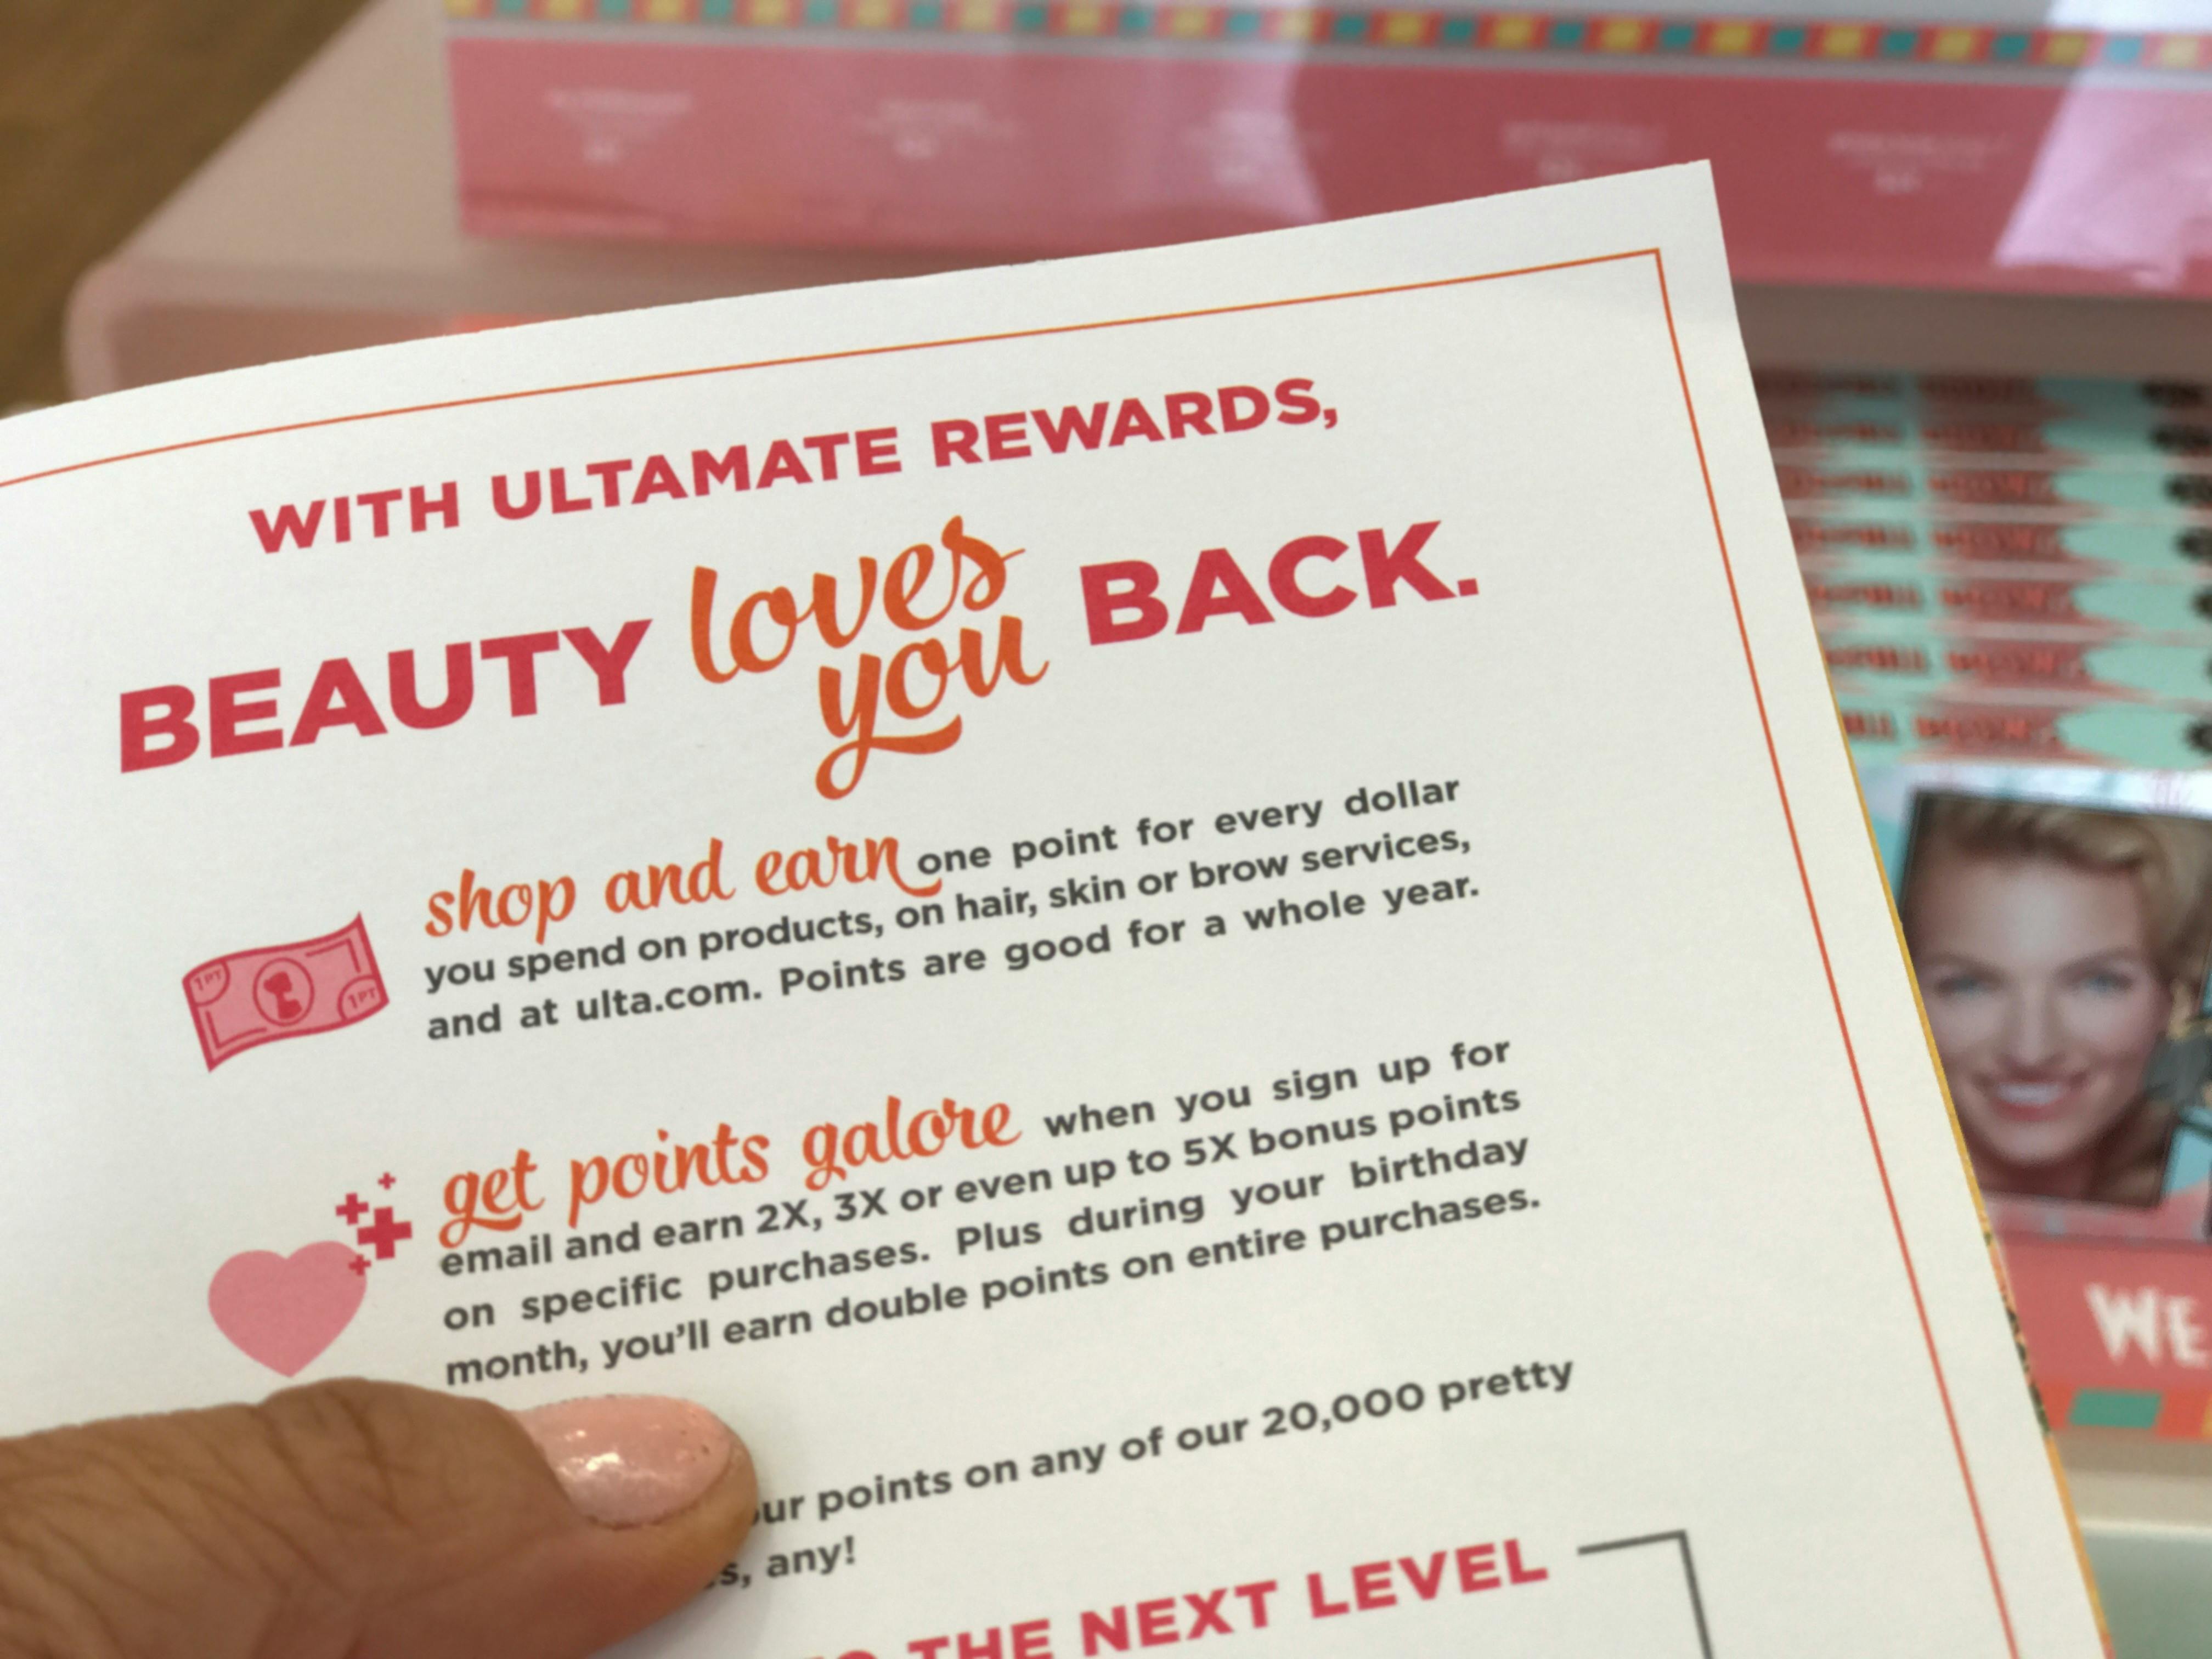 Free Beauty Stuff from Ulta for Your Birthday - Free Product Samples